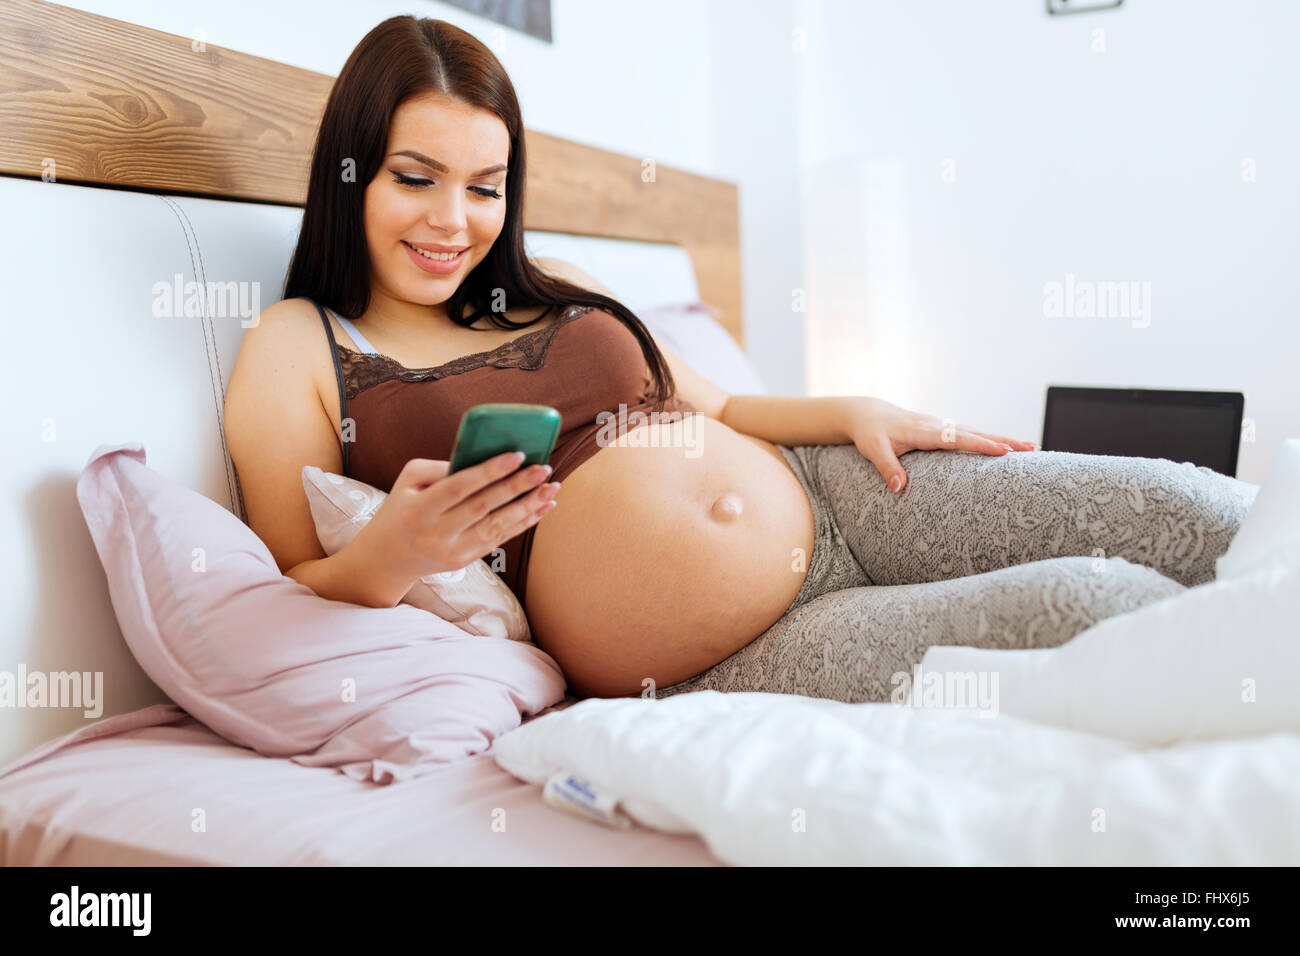 Pregnant woman using phone while lying on bed and resting Stock Photo